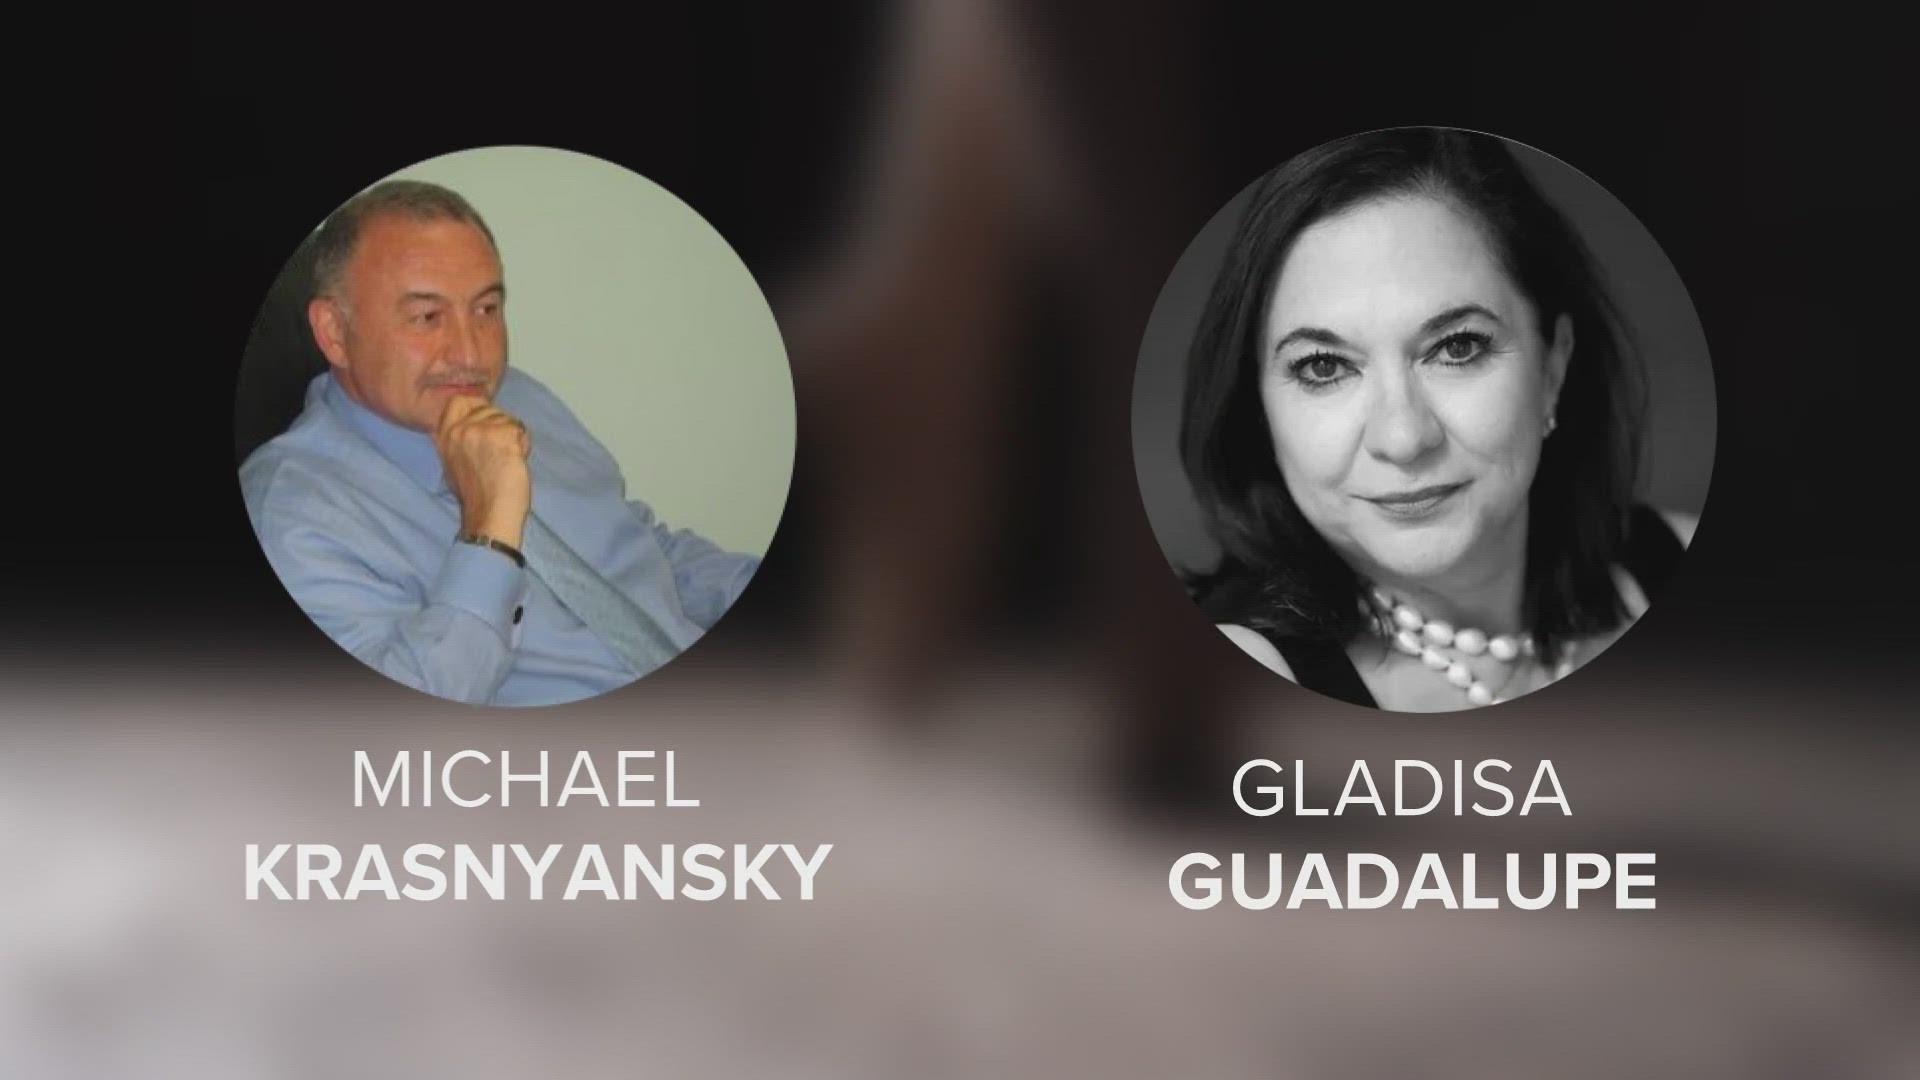 Co-founder and artistic director Gladisa Guadalupe has been fired following the probe. Her husband, ex-CEO Michael Krasnyansky, already resigned back in November.